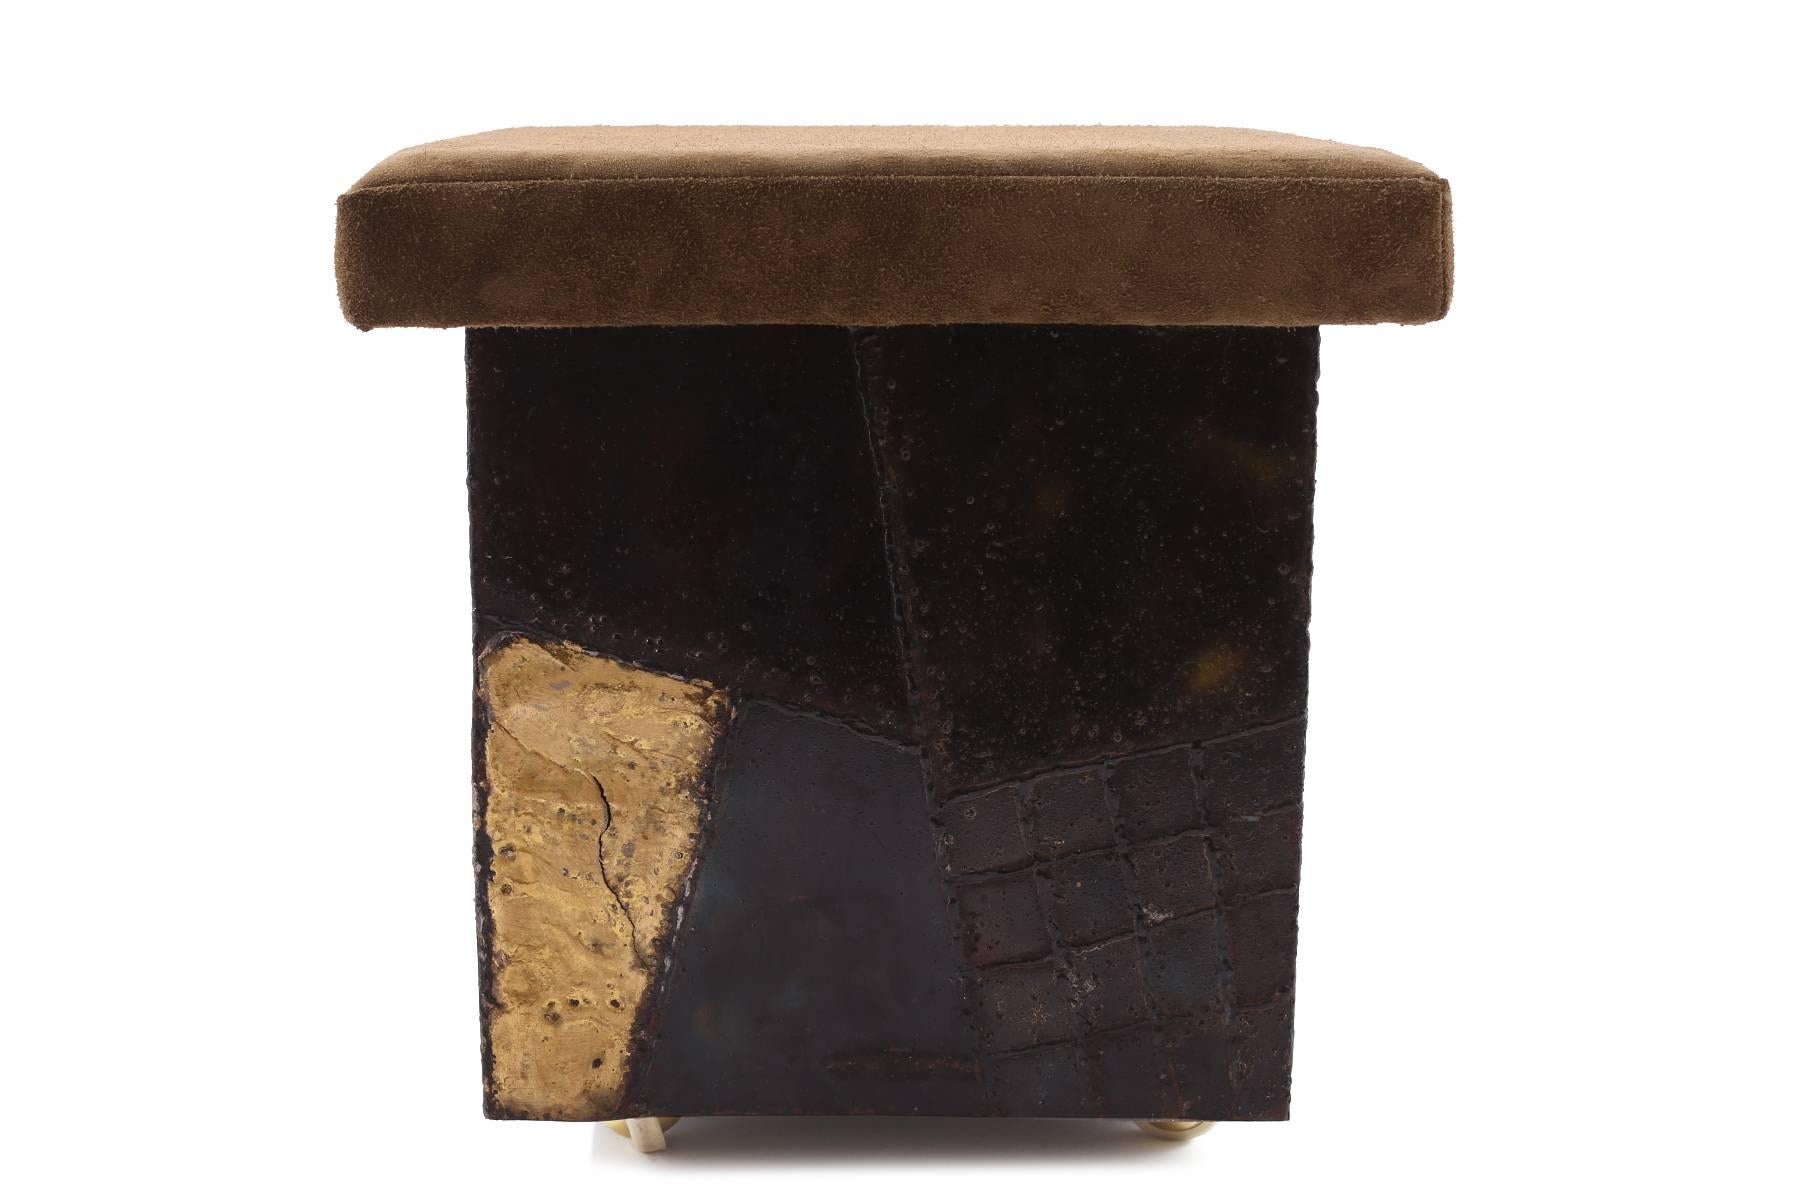 Paul Evans for Directional stool, circa 1969. This signed example has a beautifully patinated and multicolored base and has been recently upholstered in a khaki suede.